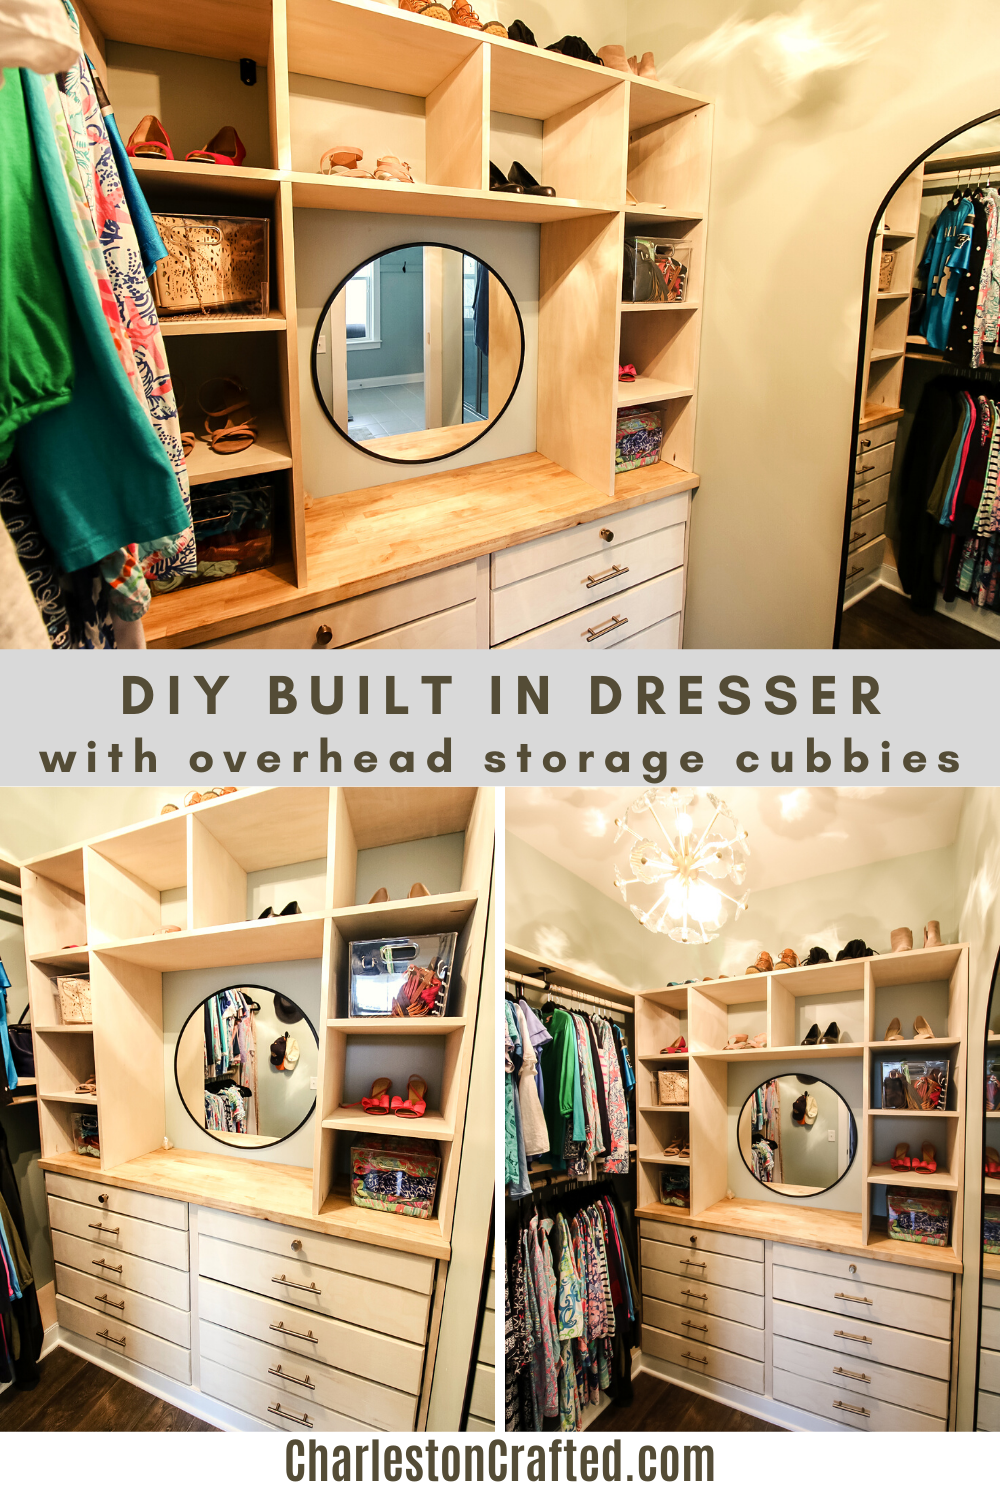 https://www.charlestoncrafted.com/wp-content/uploads/2022/03/Master-closet-built-in-dresser.png